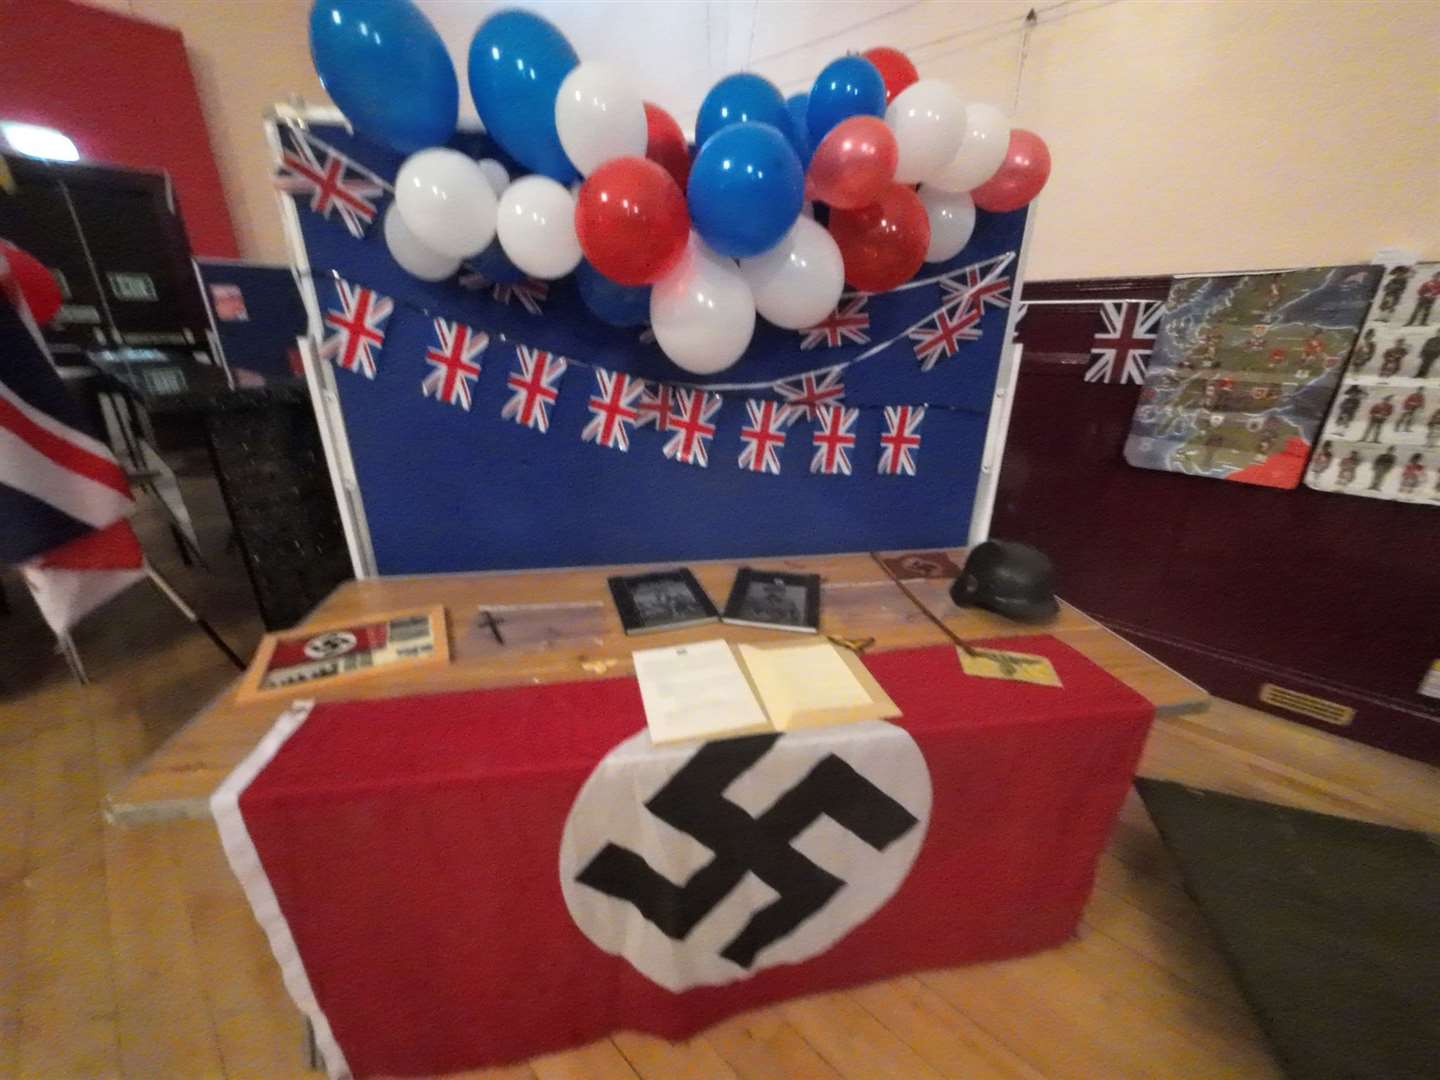 The flag was featured as part of the 'Blast from the Past' event.